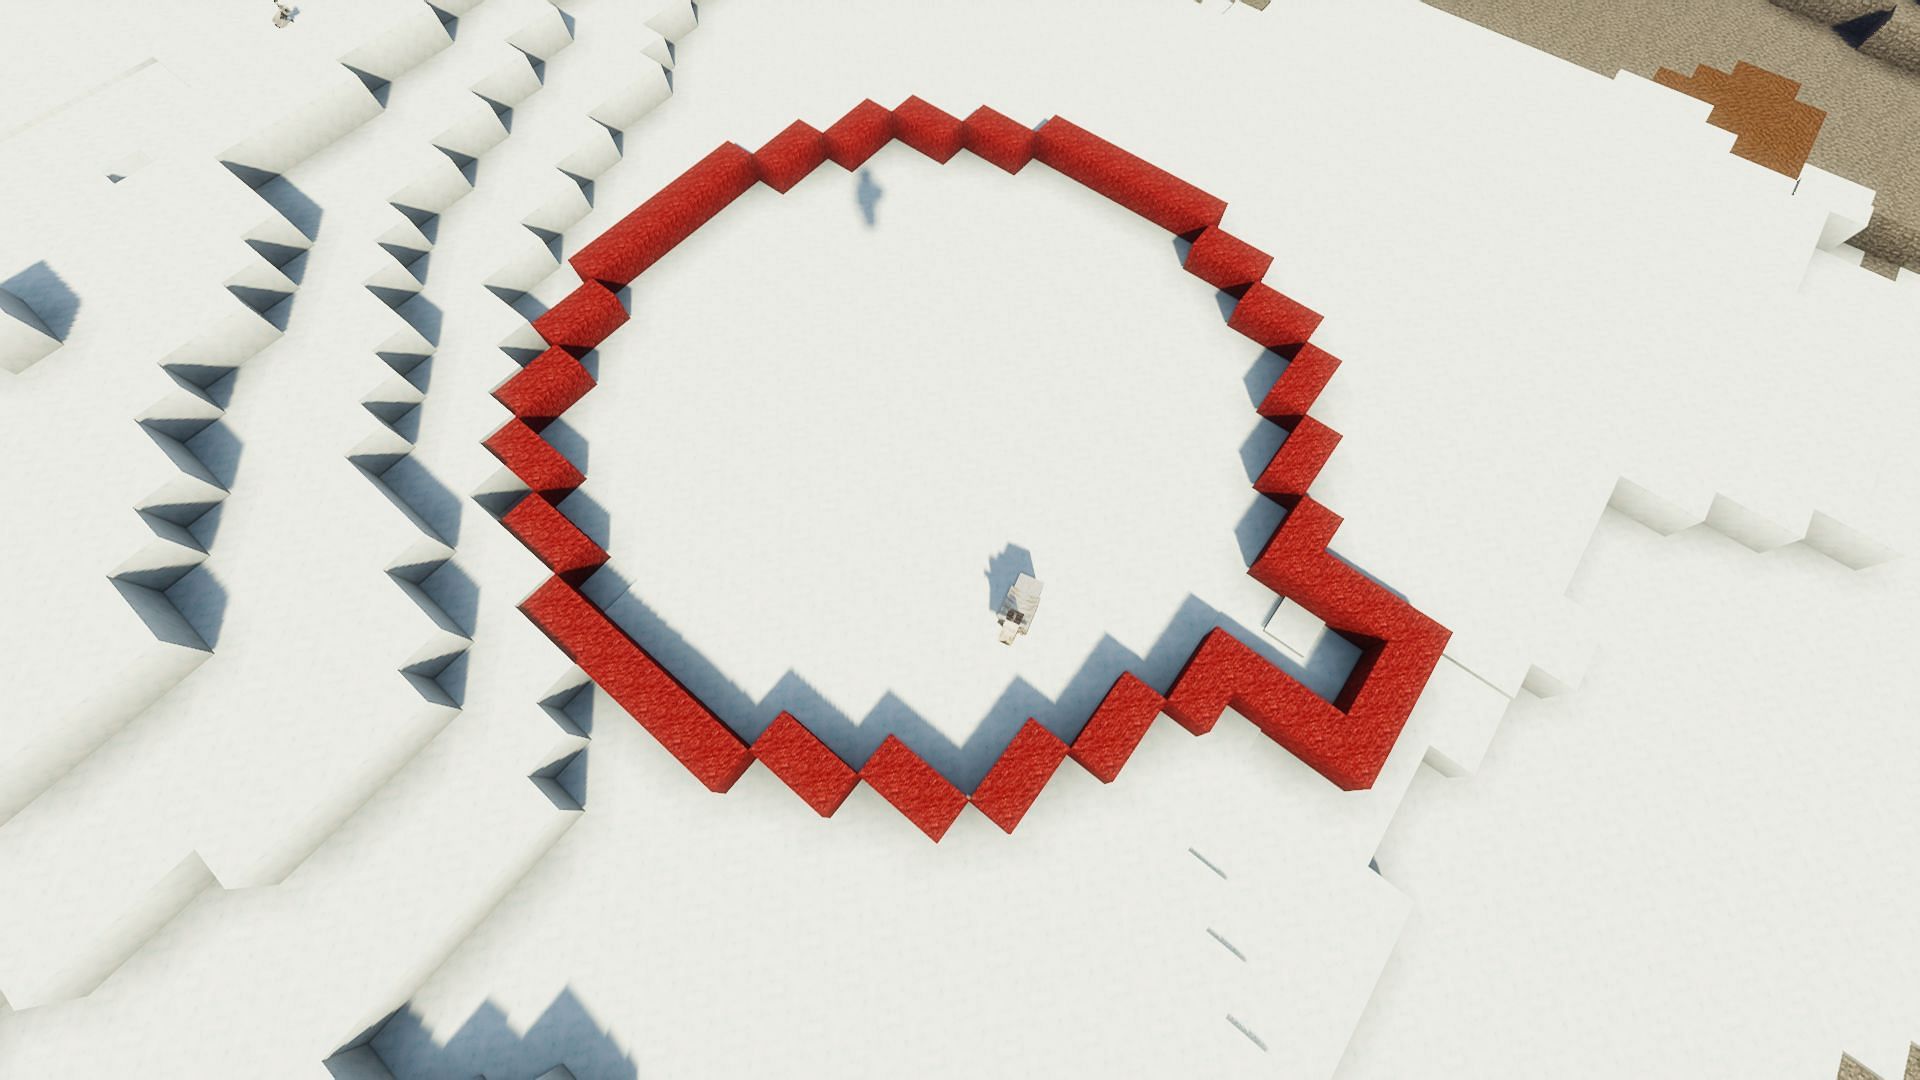 The outline of the igloo (Image via Minecraft)